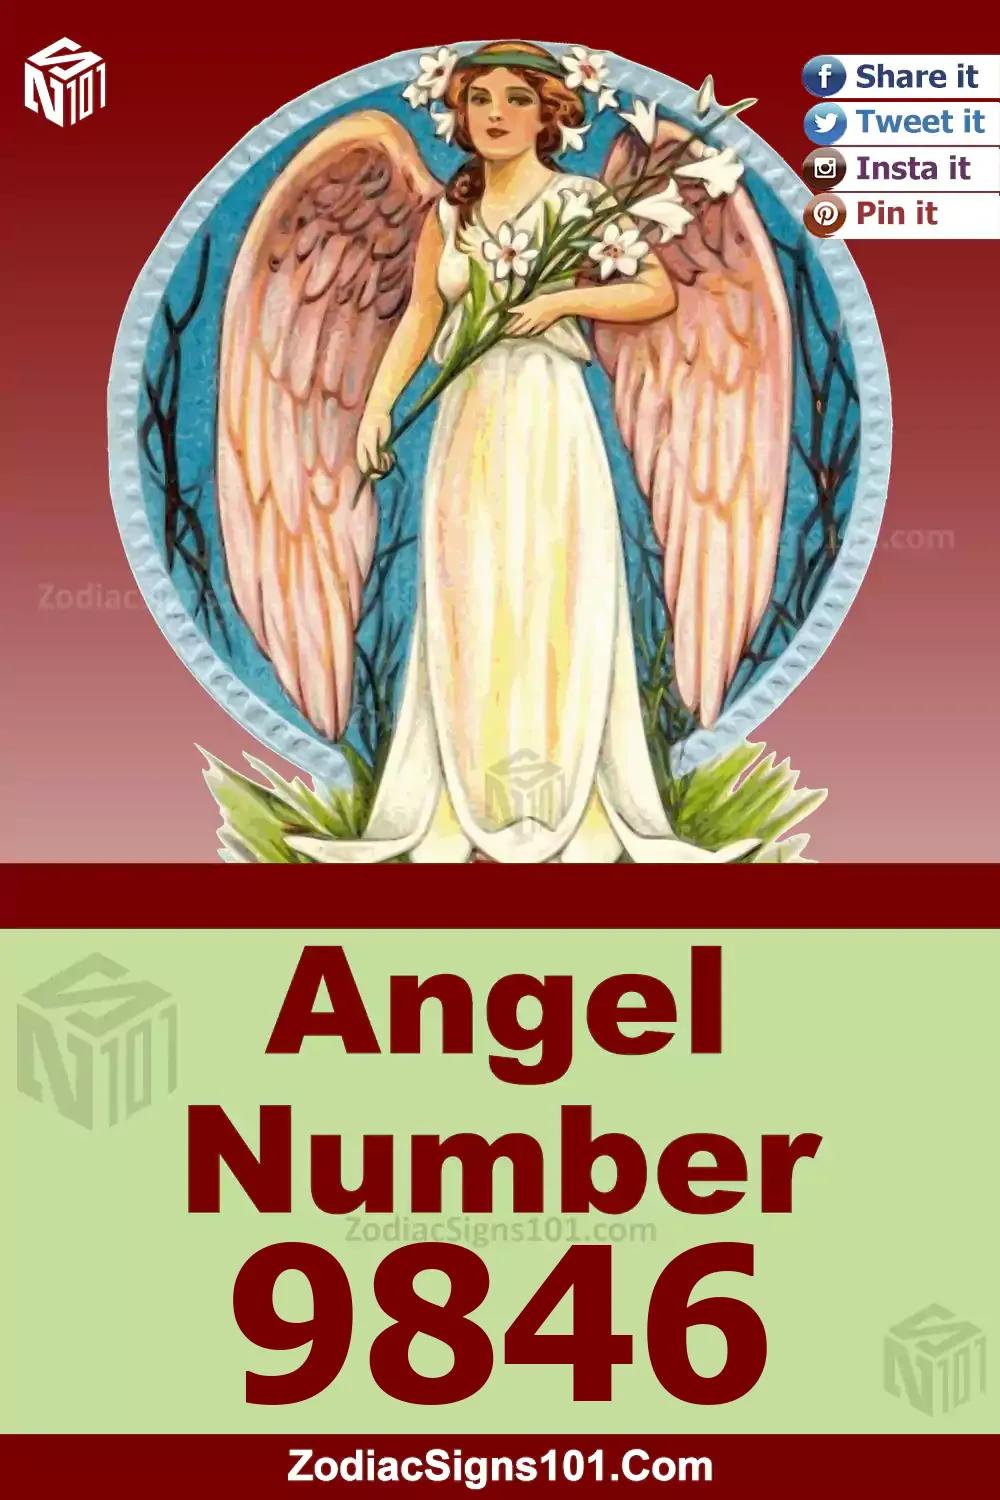 9846 Angel Number Meaning